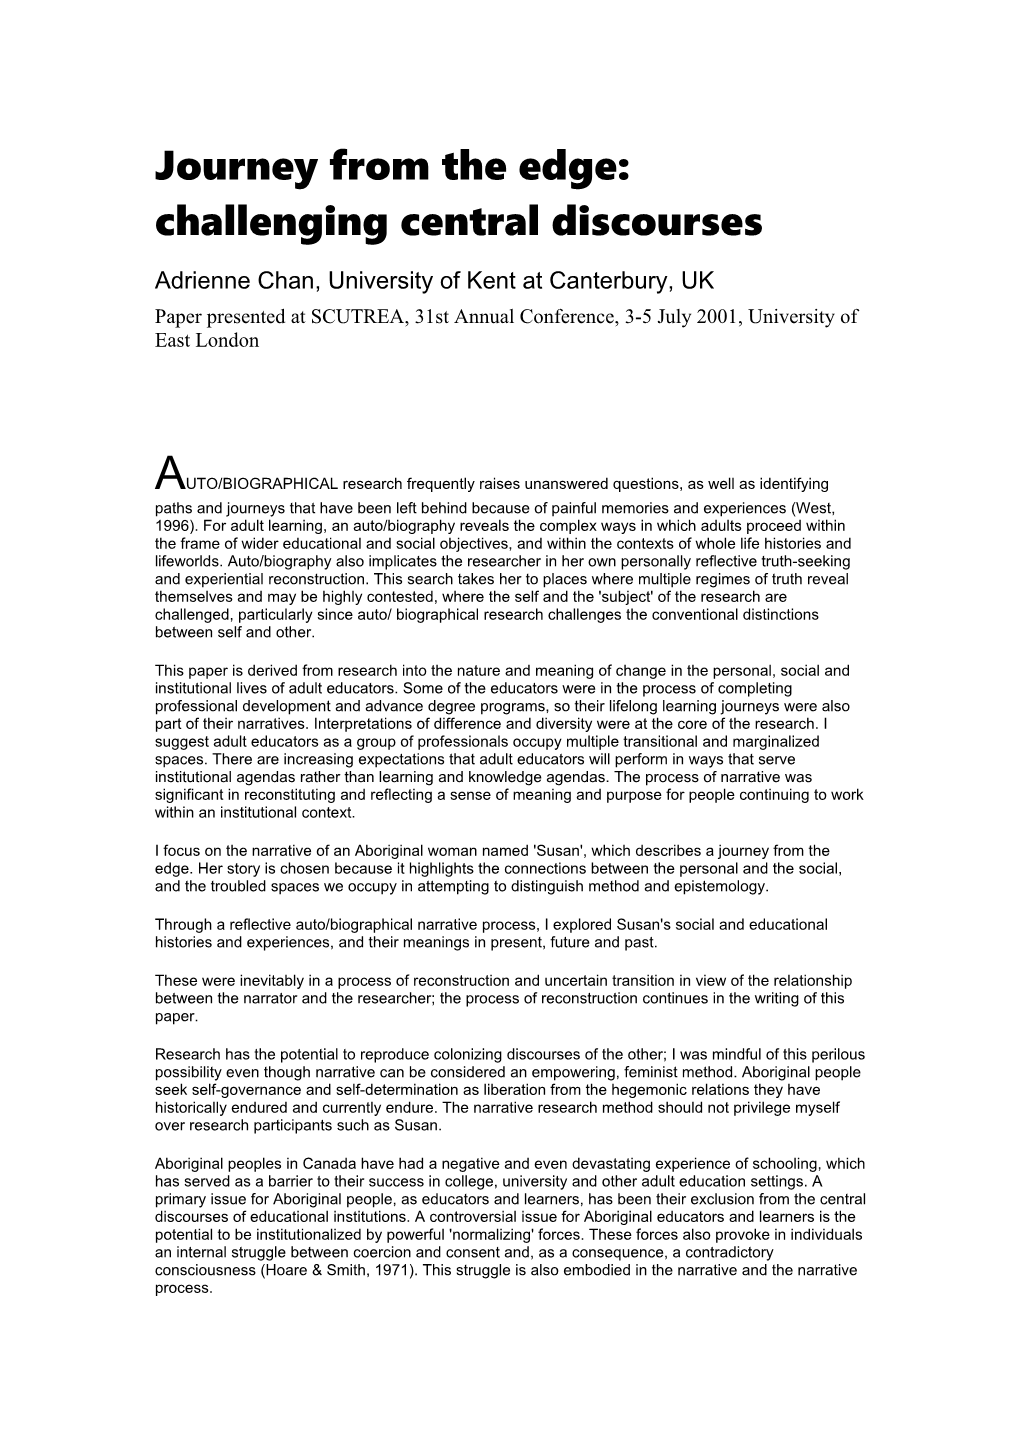 Journey from the Edge: Challenging Central Discourses